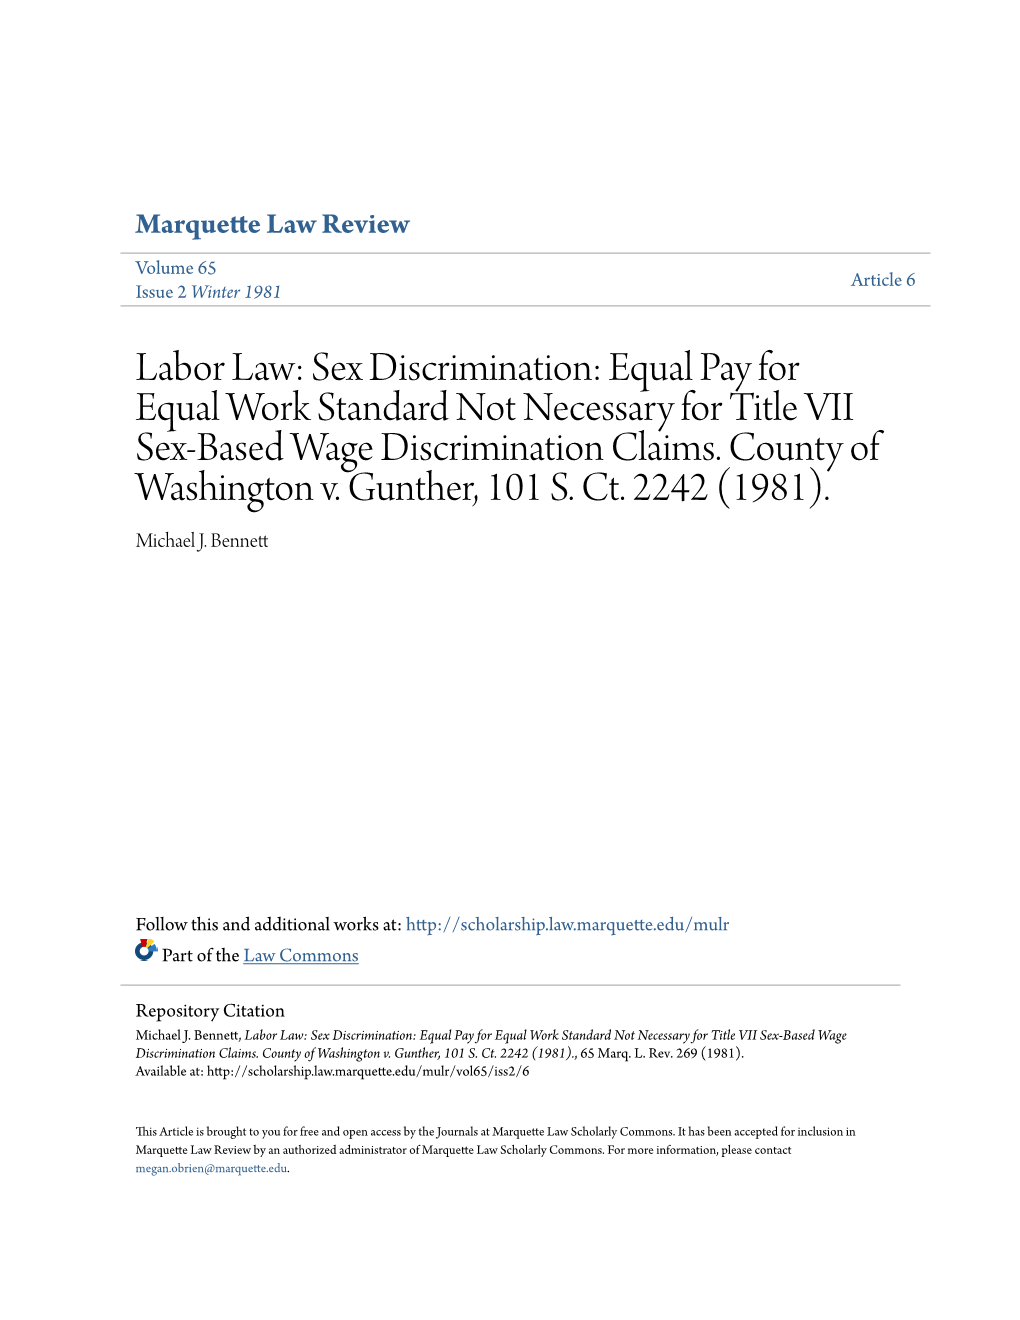 Sex Discrimination: Equal Pay for Equal Work Standard Not Necessary for Title VII Sex-Based Wage Discrimination Claims